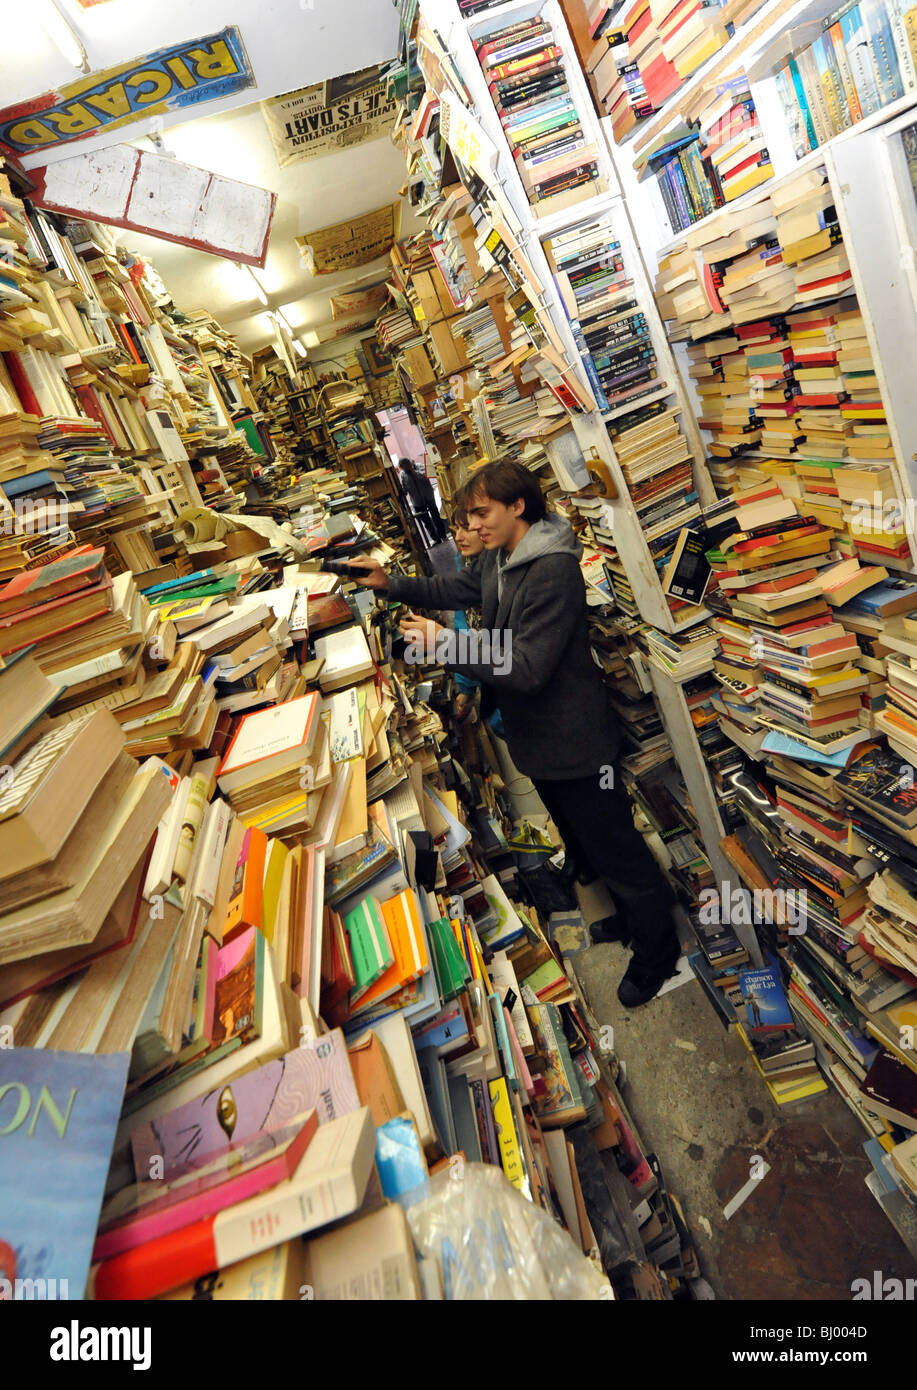 Secondhand bookseller Stock Photo